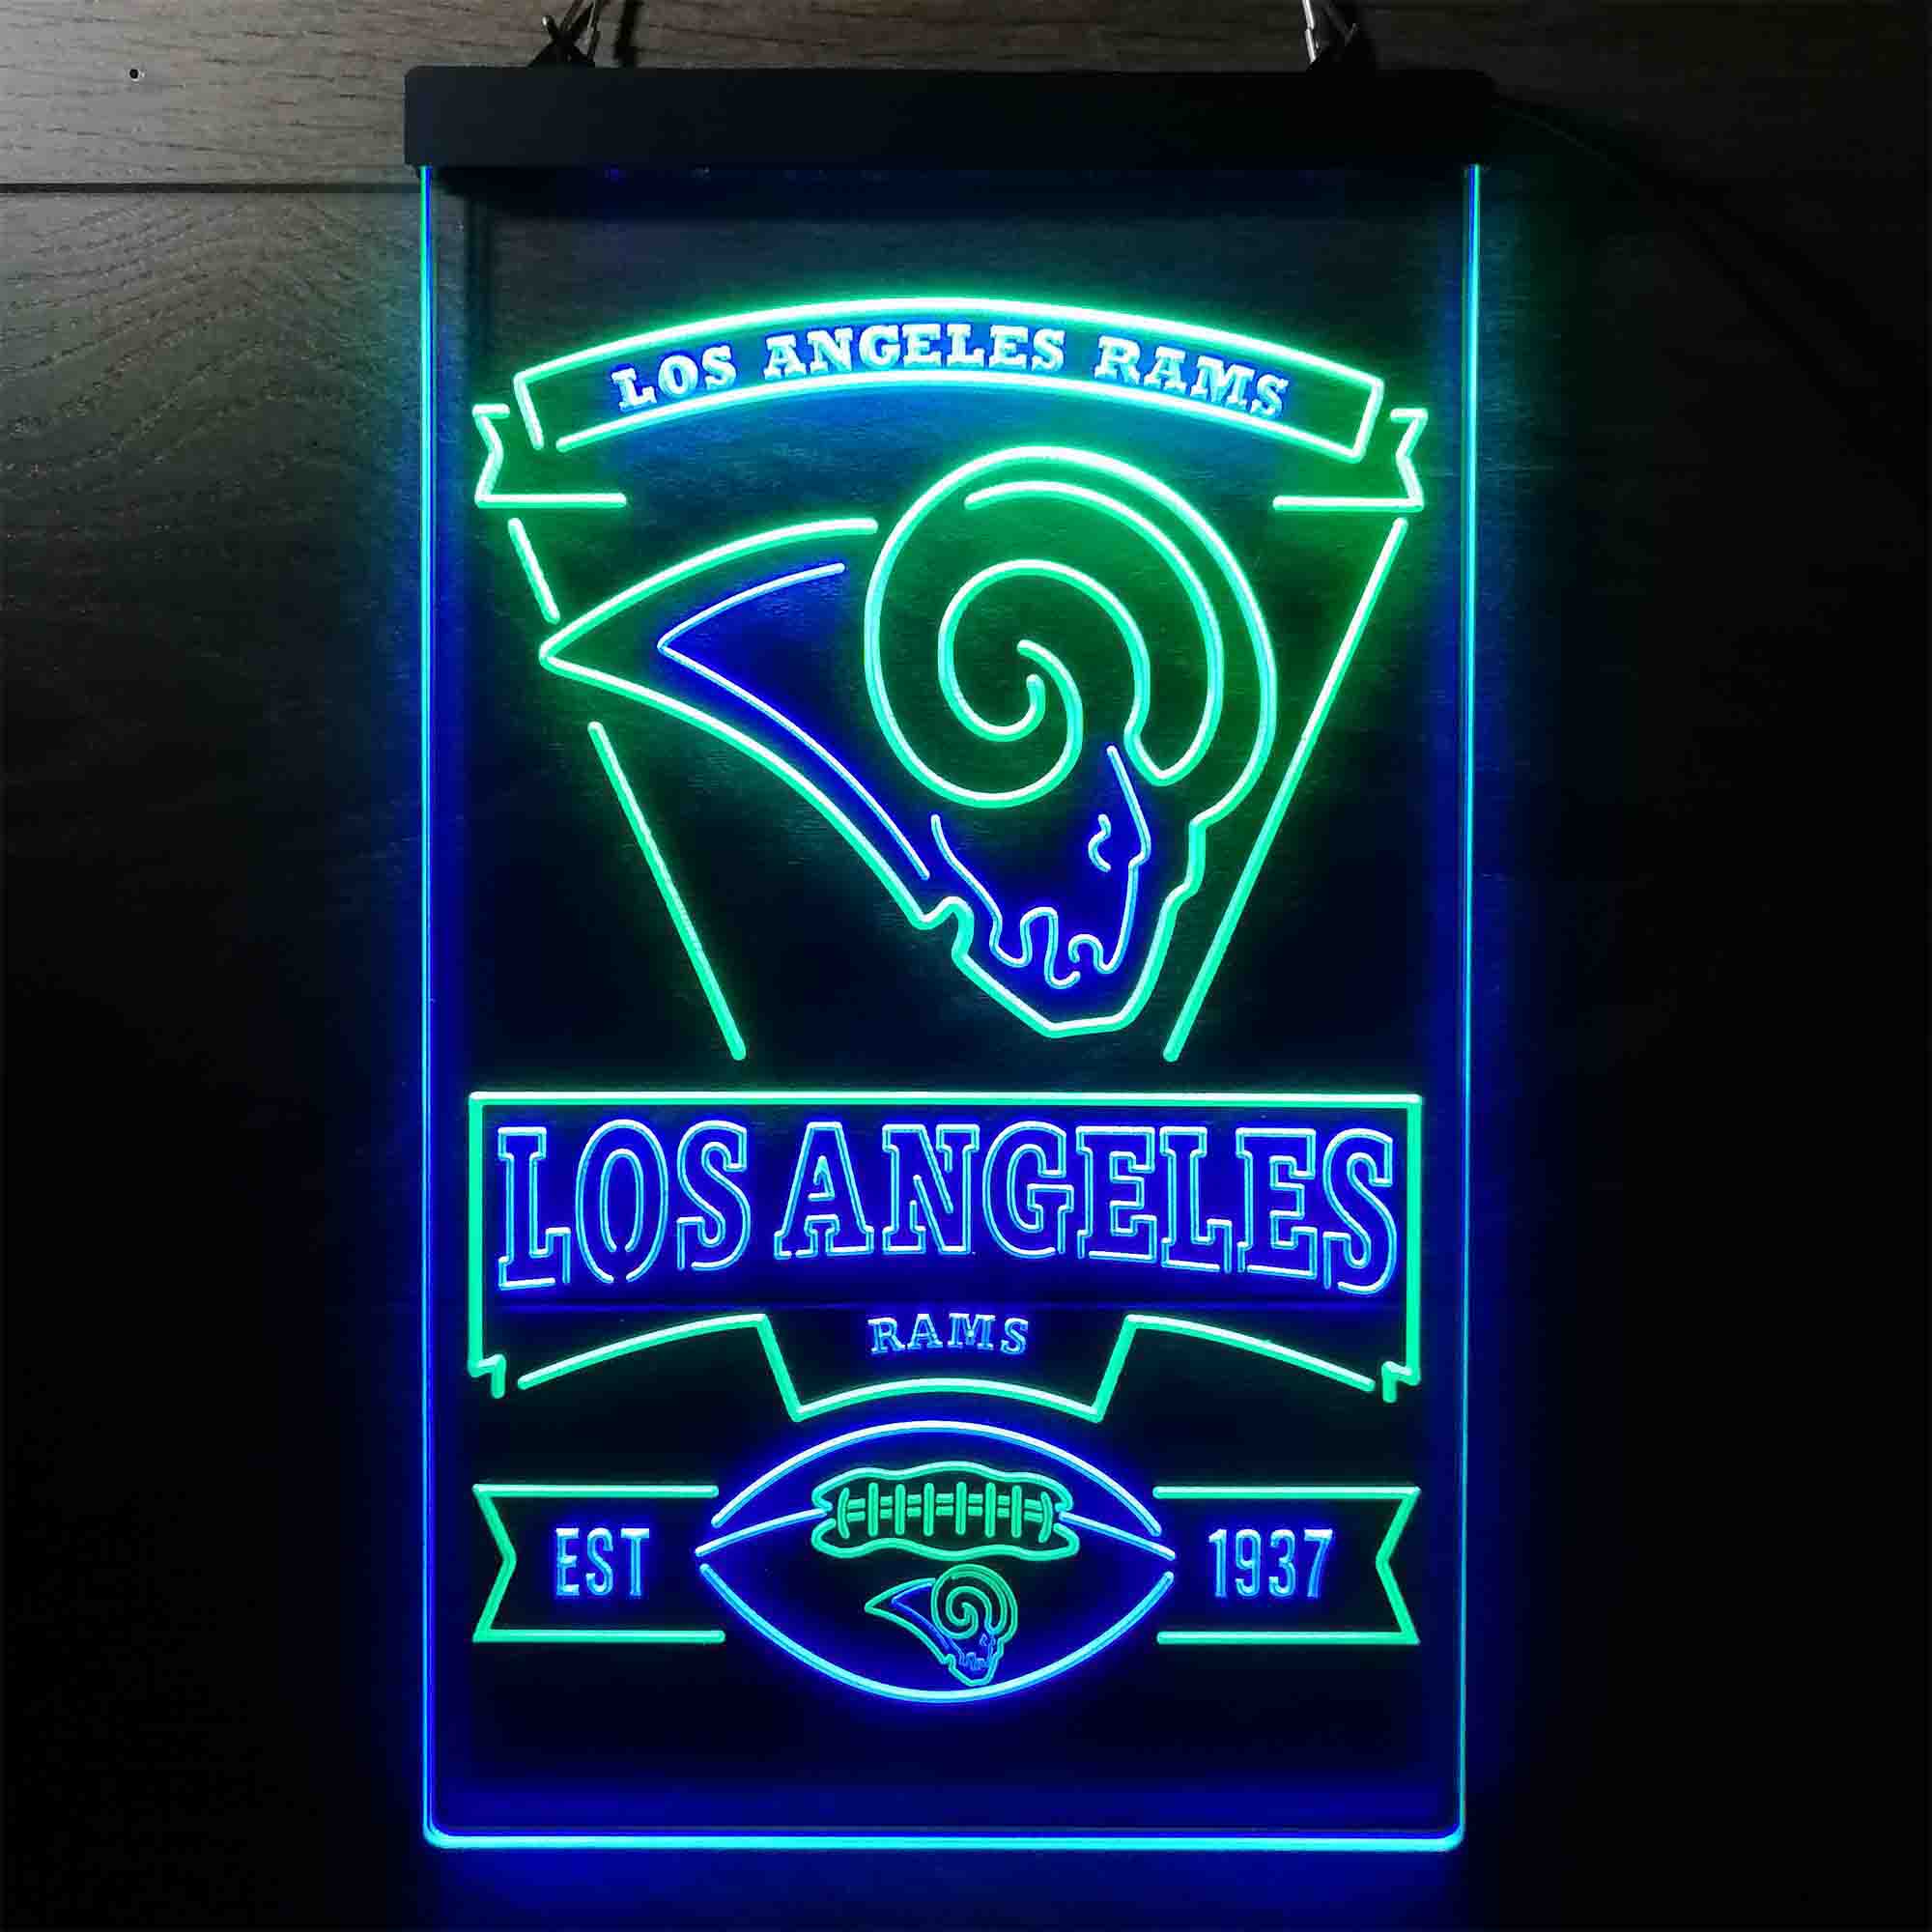 Los Angeles Rams Super Bowl Champions Collectible Neon LED Sign